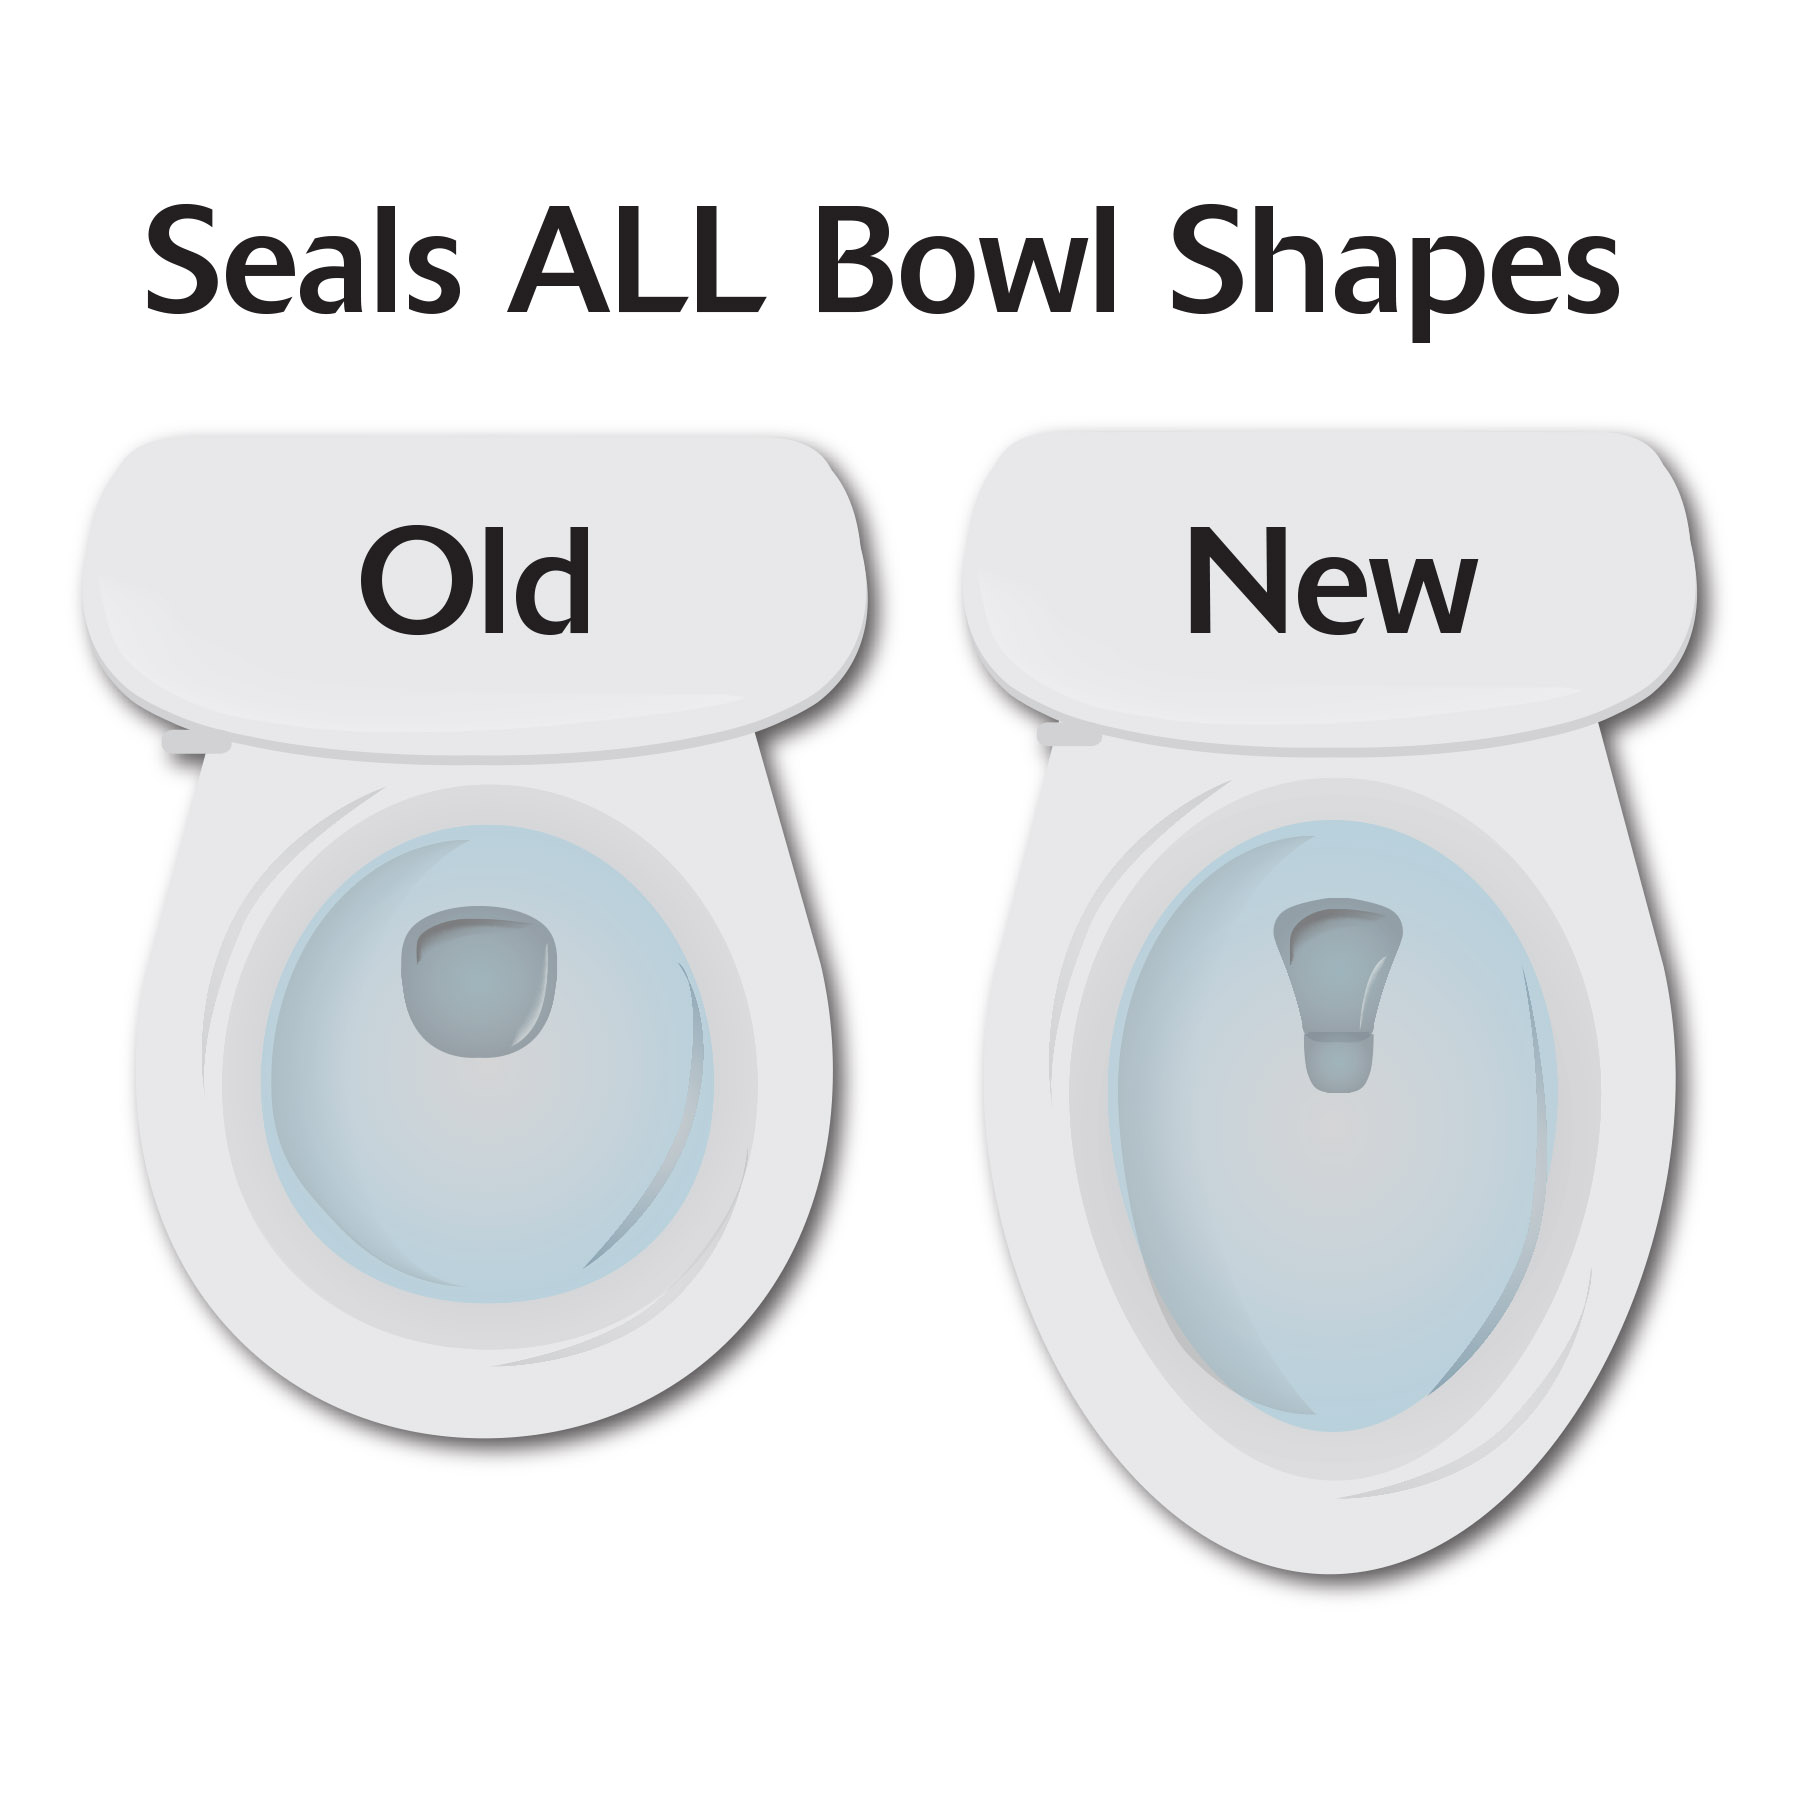 Toilet Plunger Seals all bowl shapes